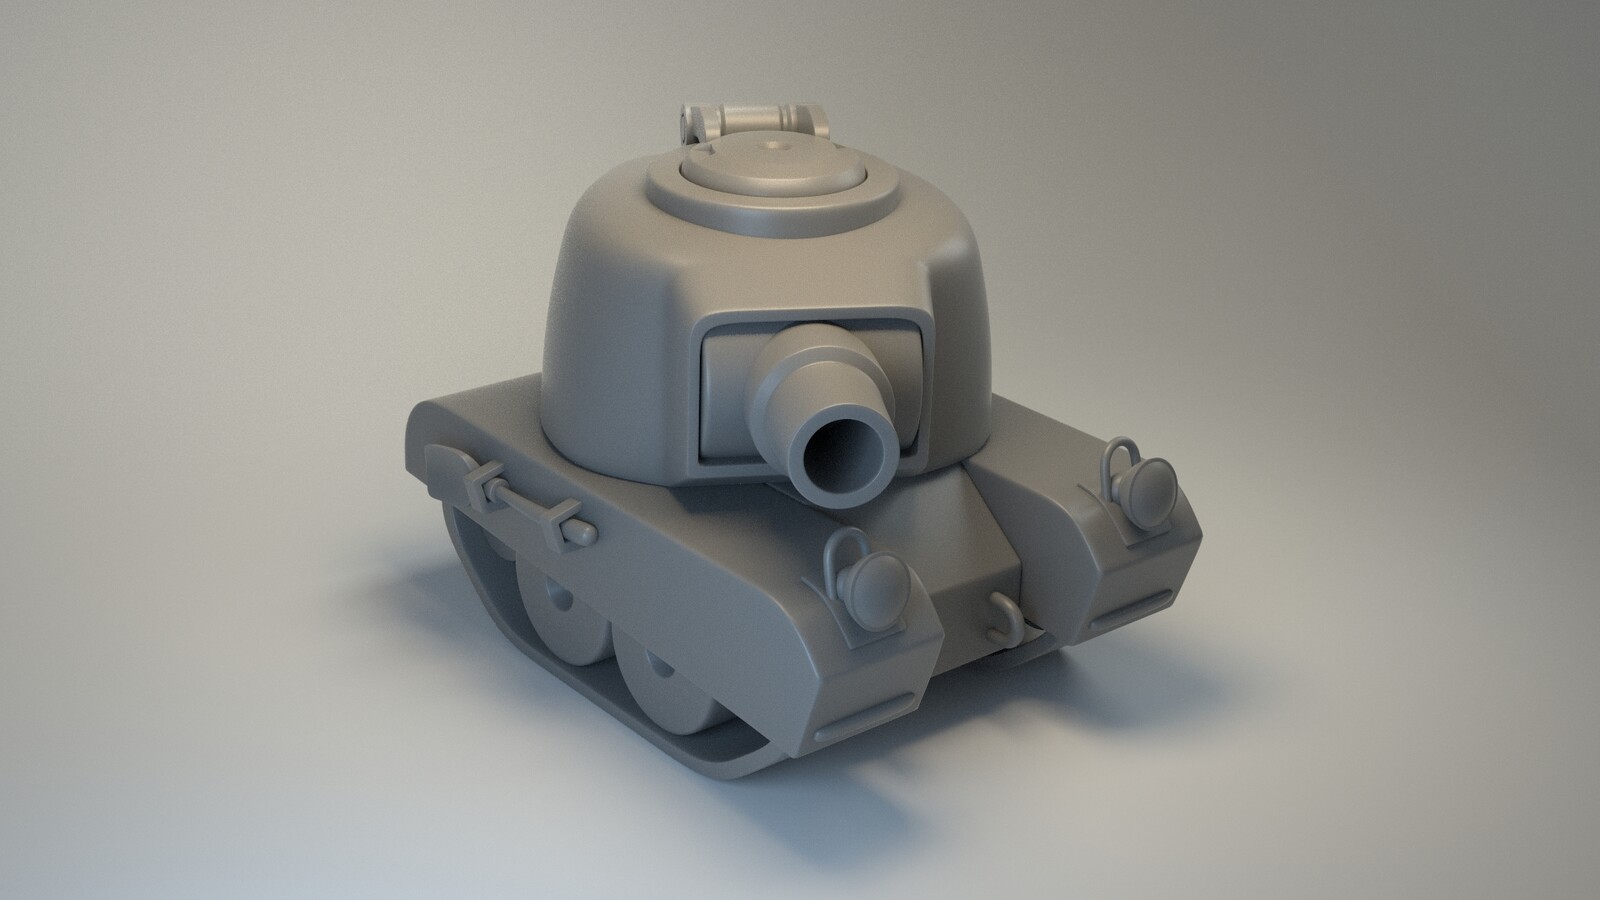 Base - High Poly - Rendered in Modo.